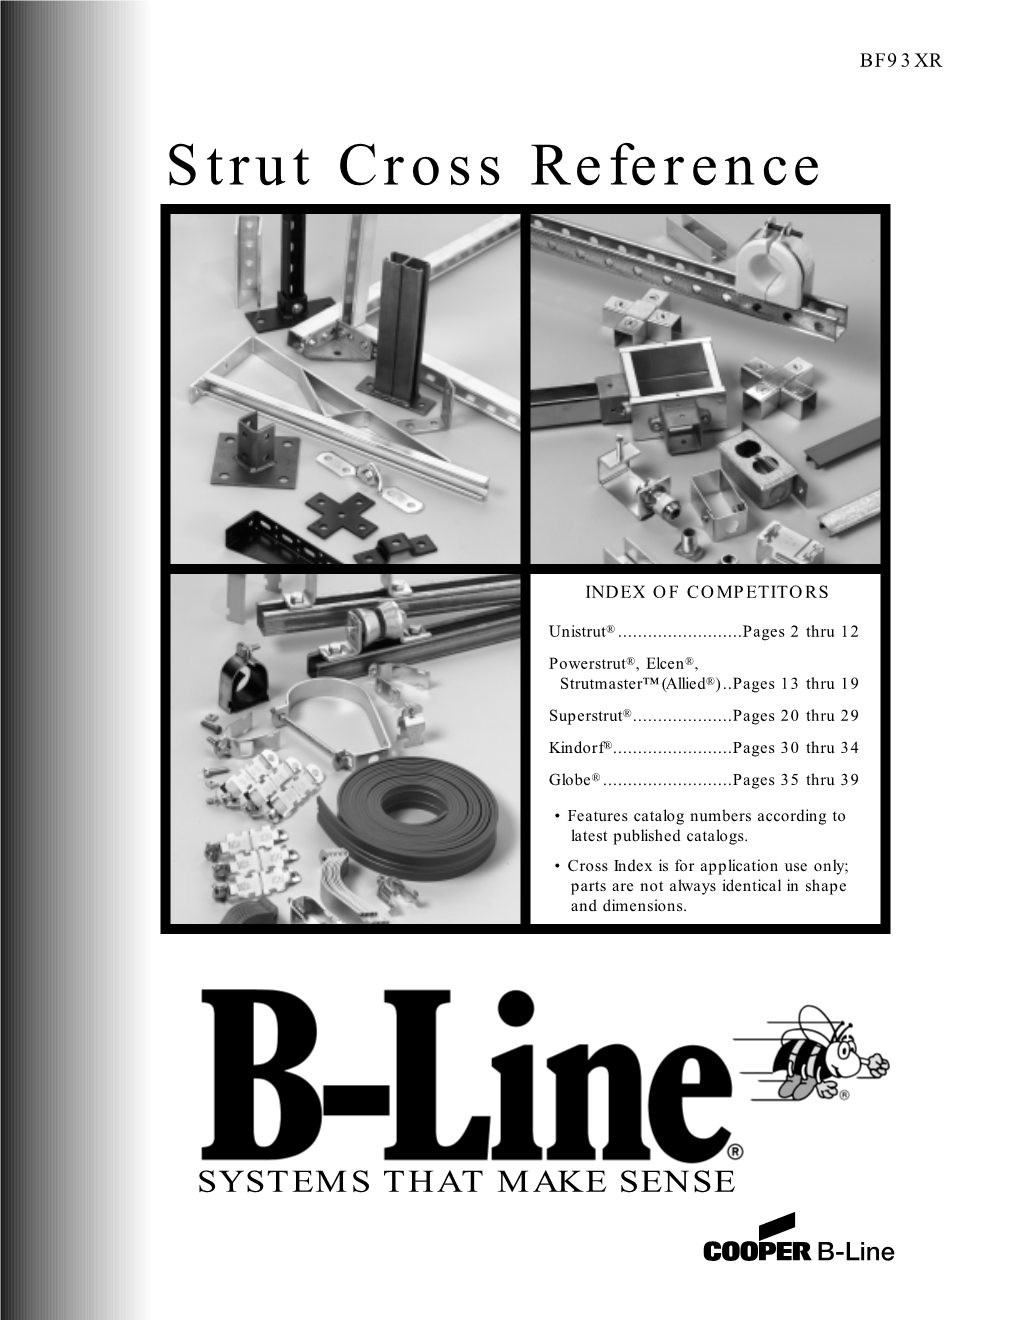 Cooper B-Line Strut Systems Competitor Cross Reference